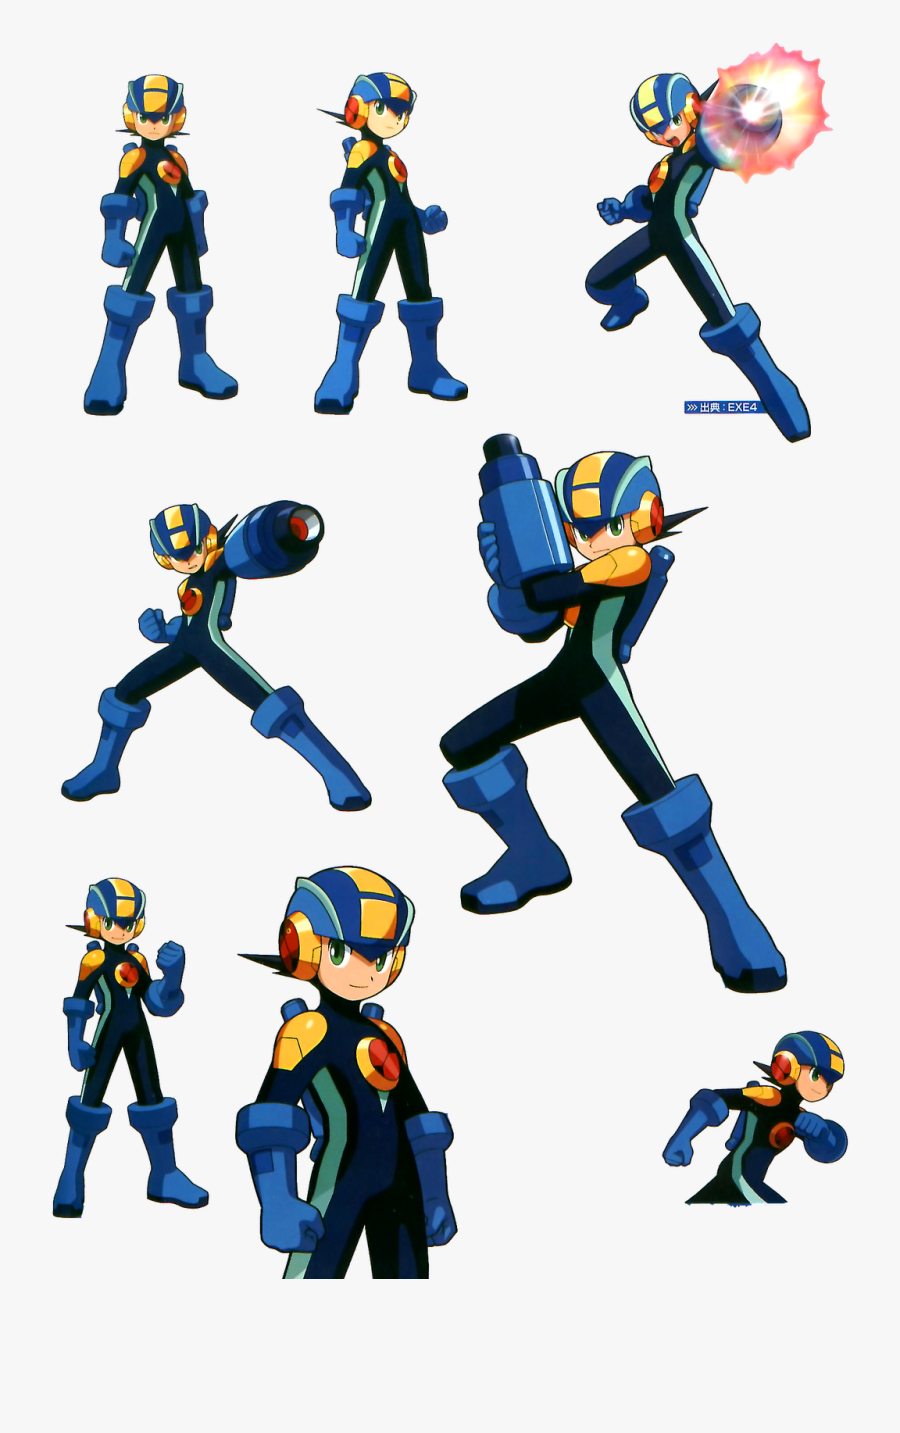 I Cleaned Up The Scan To The Best Of My Ability And - Megaman Battle Network Megaman Official Art, Transparent Clipart